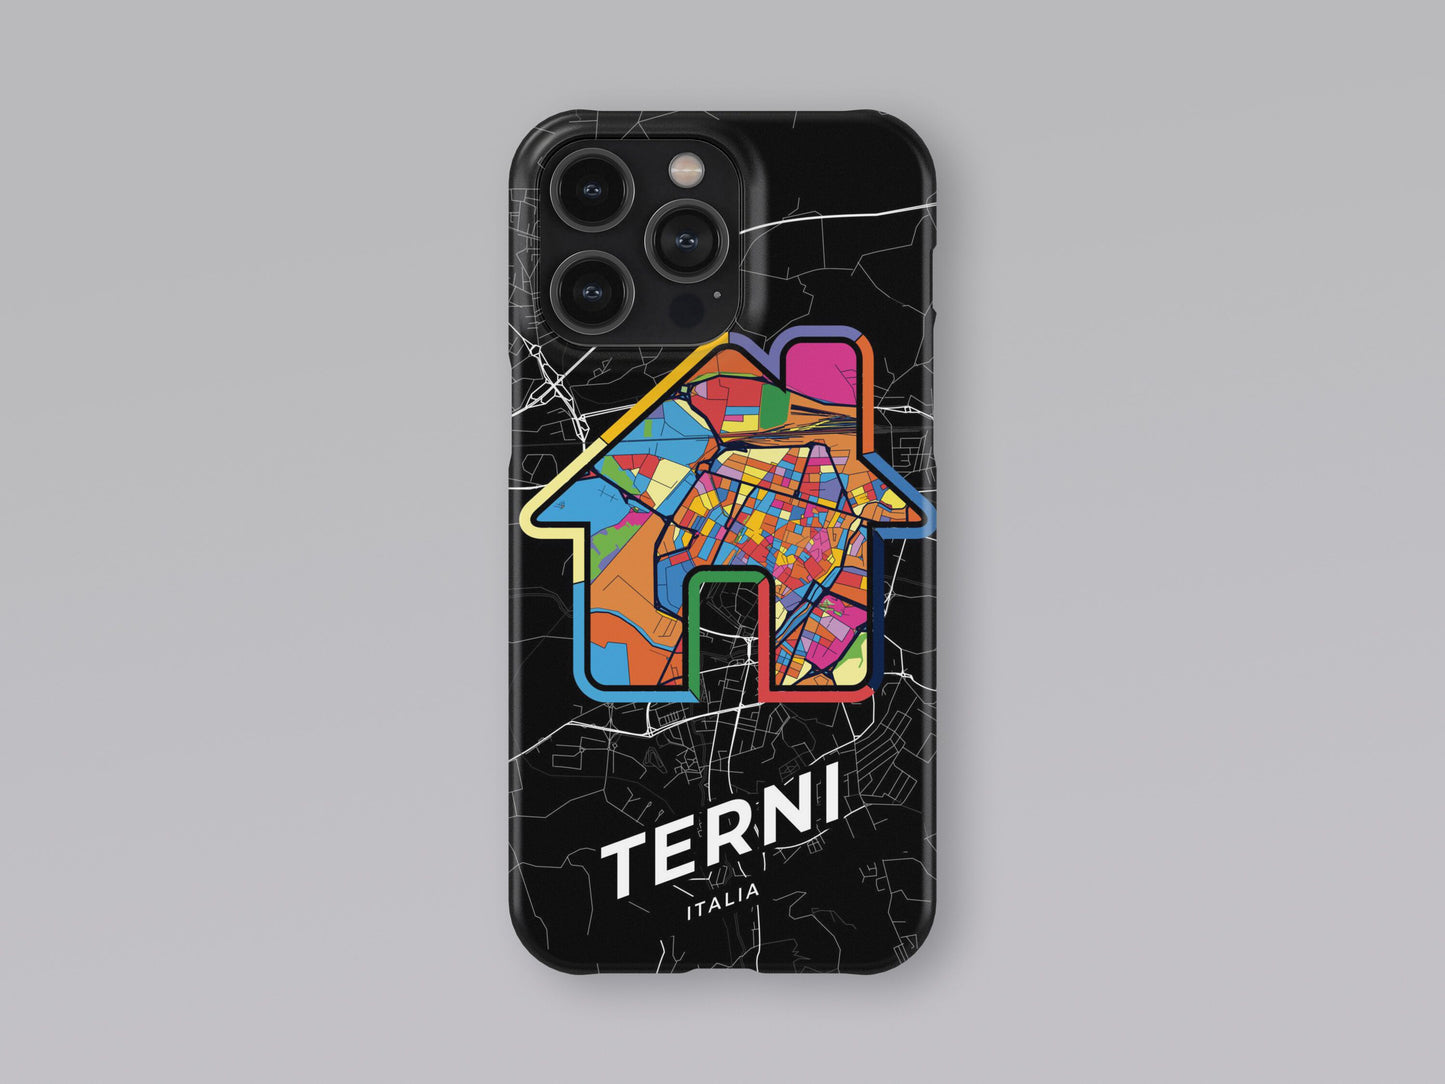 Terni Italy slim phone case with colorful icon 3